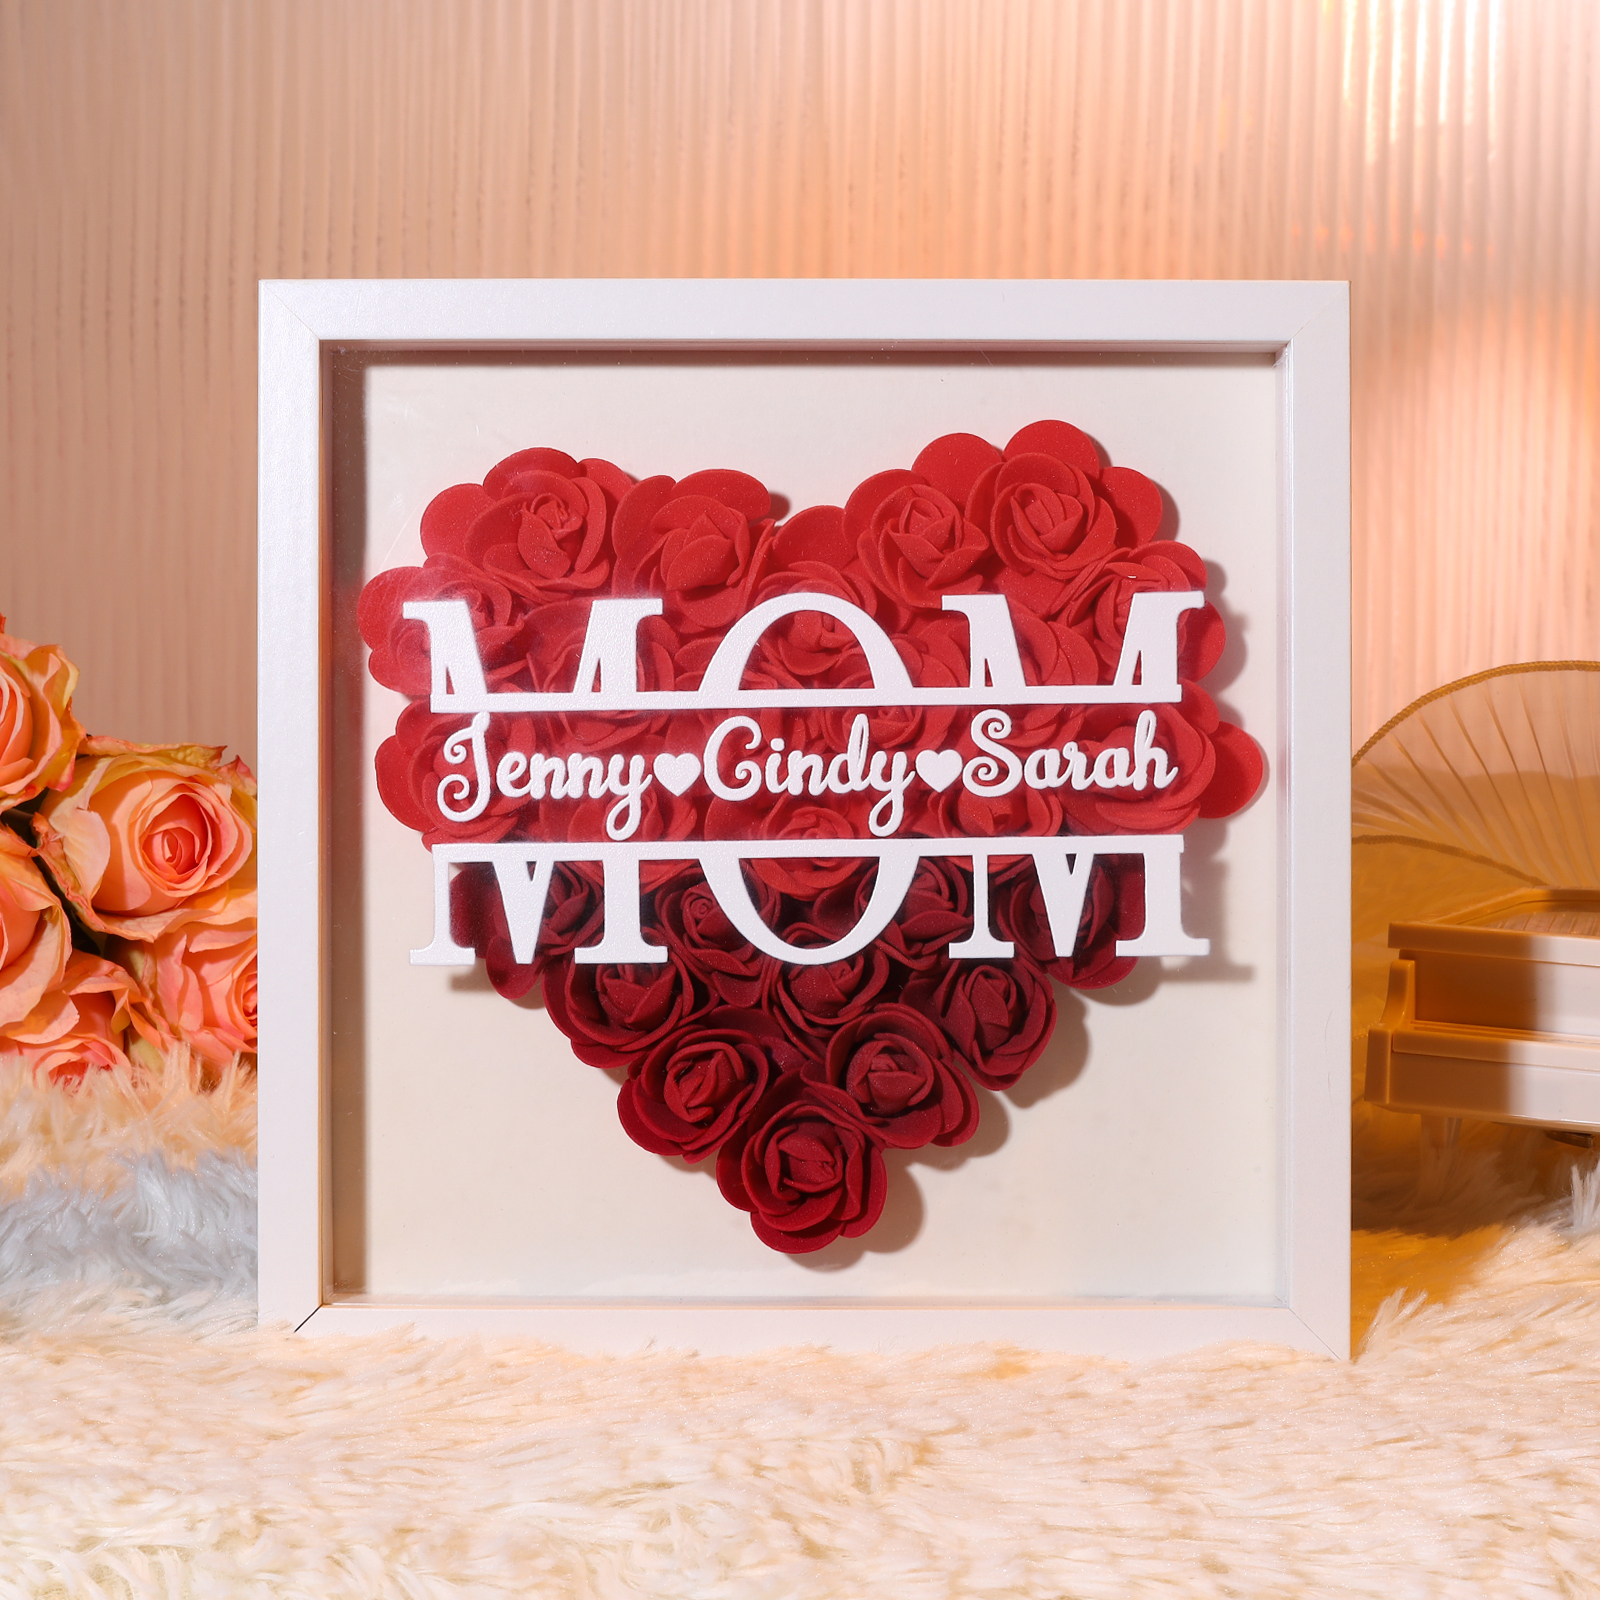 Personalized Name Rose Heart Density Board Frame Custom Text Gift For Mom